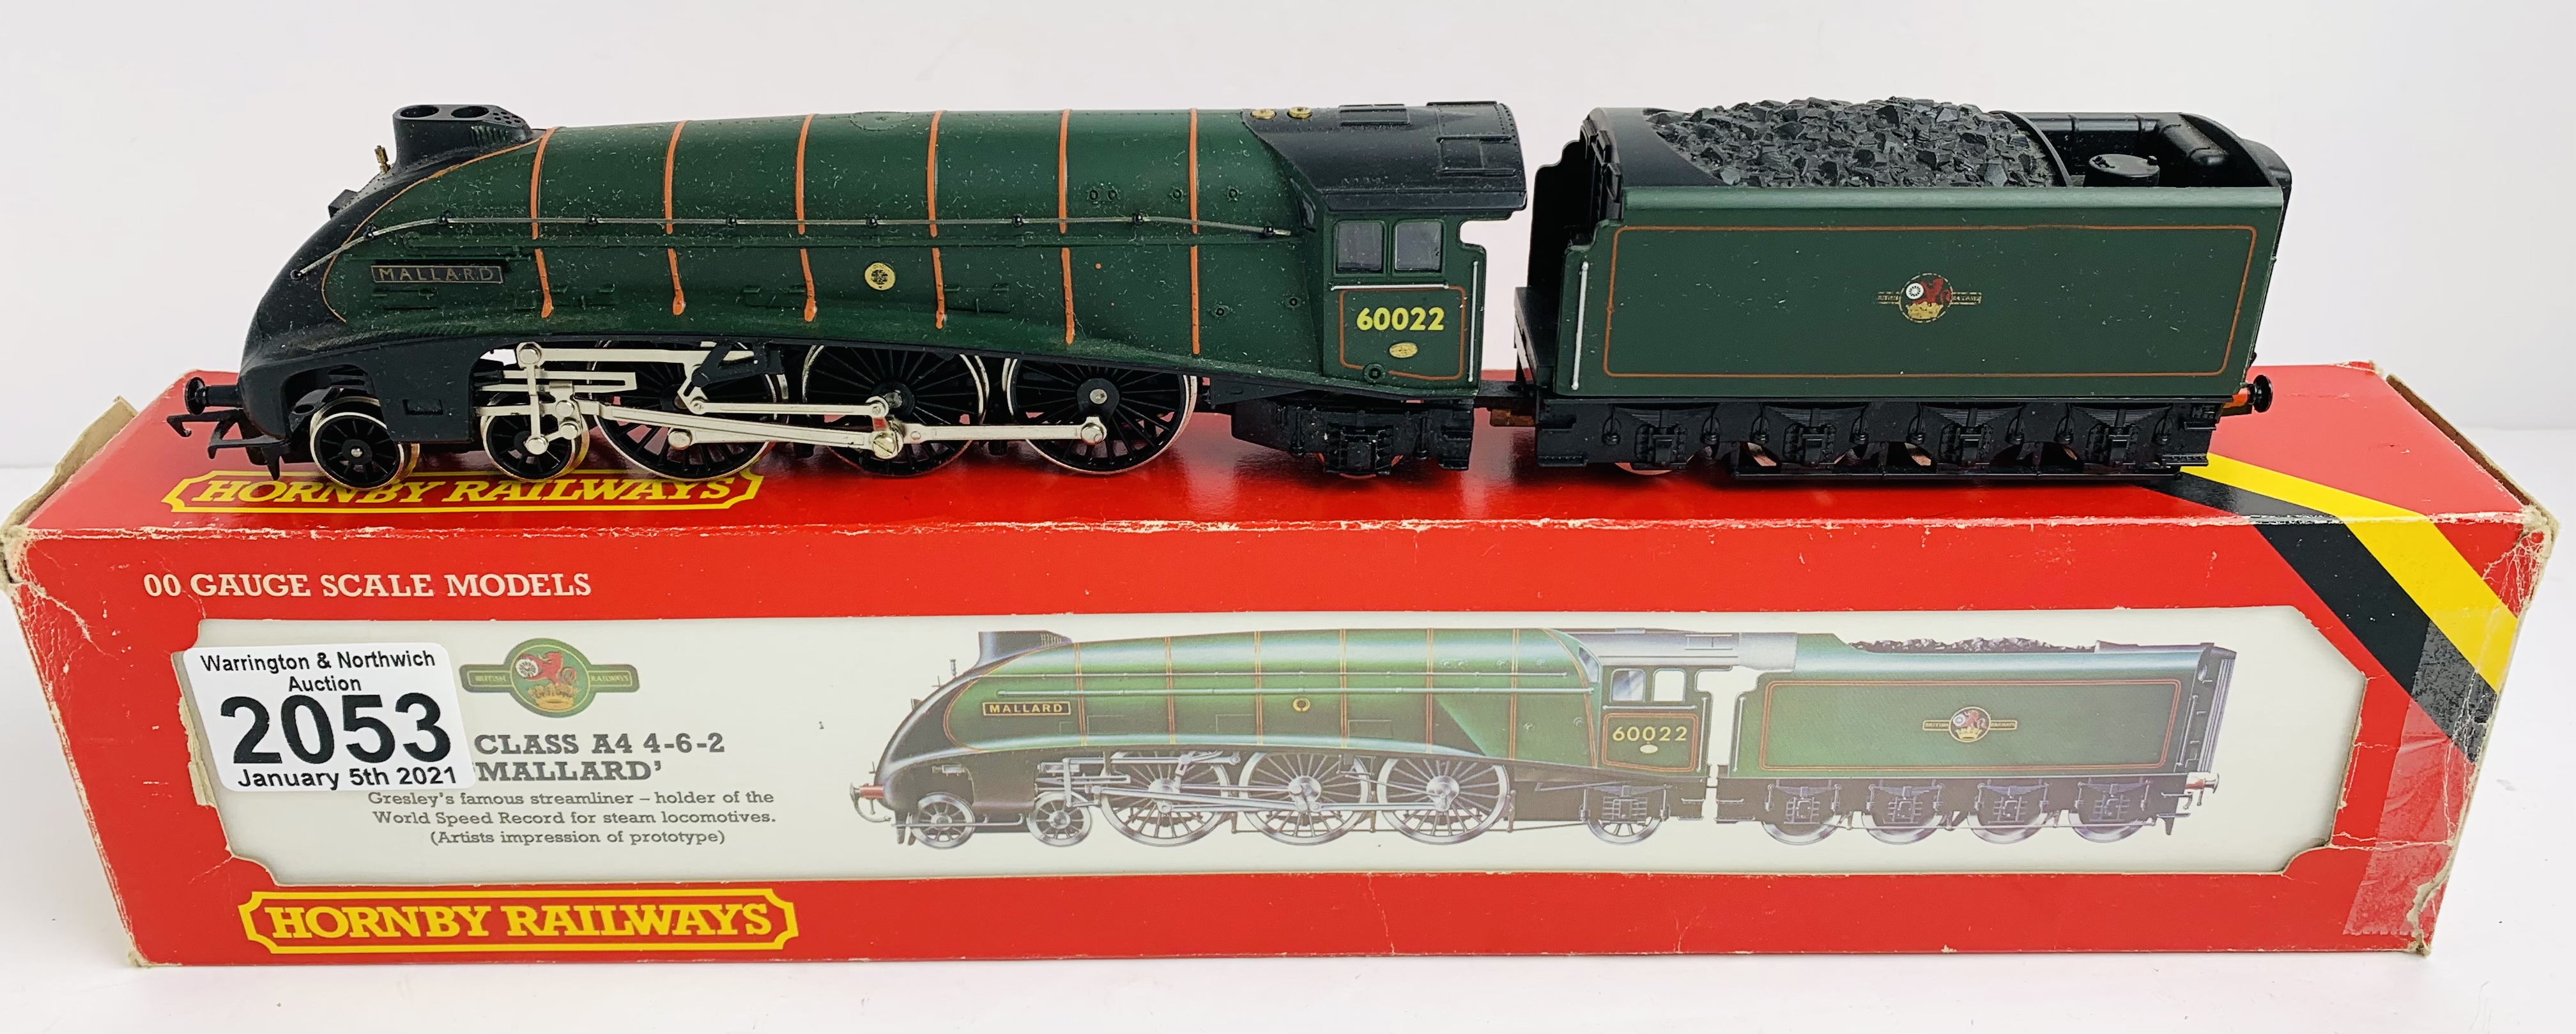 Hornby OO Gauge Mallard Locomotive Boxed P&P Group 1 (£14+VAT for the first lot and £1+VAT for